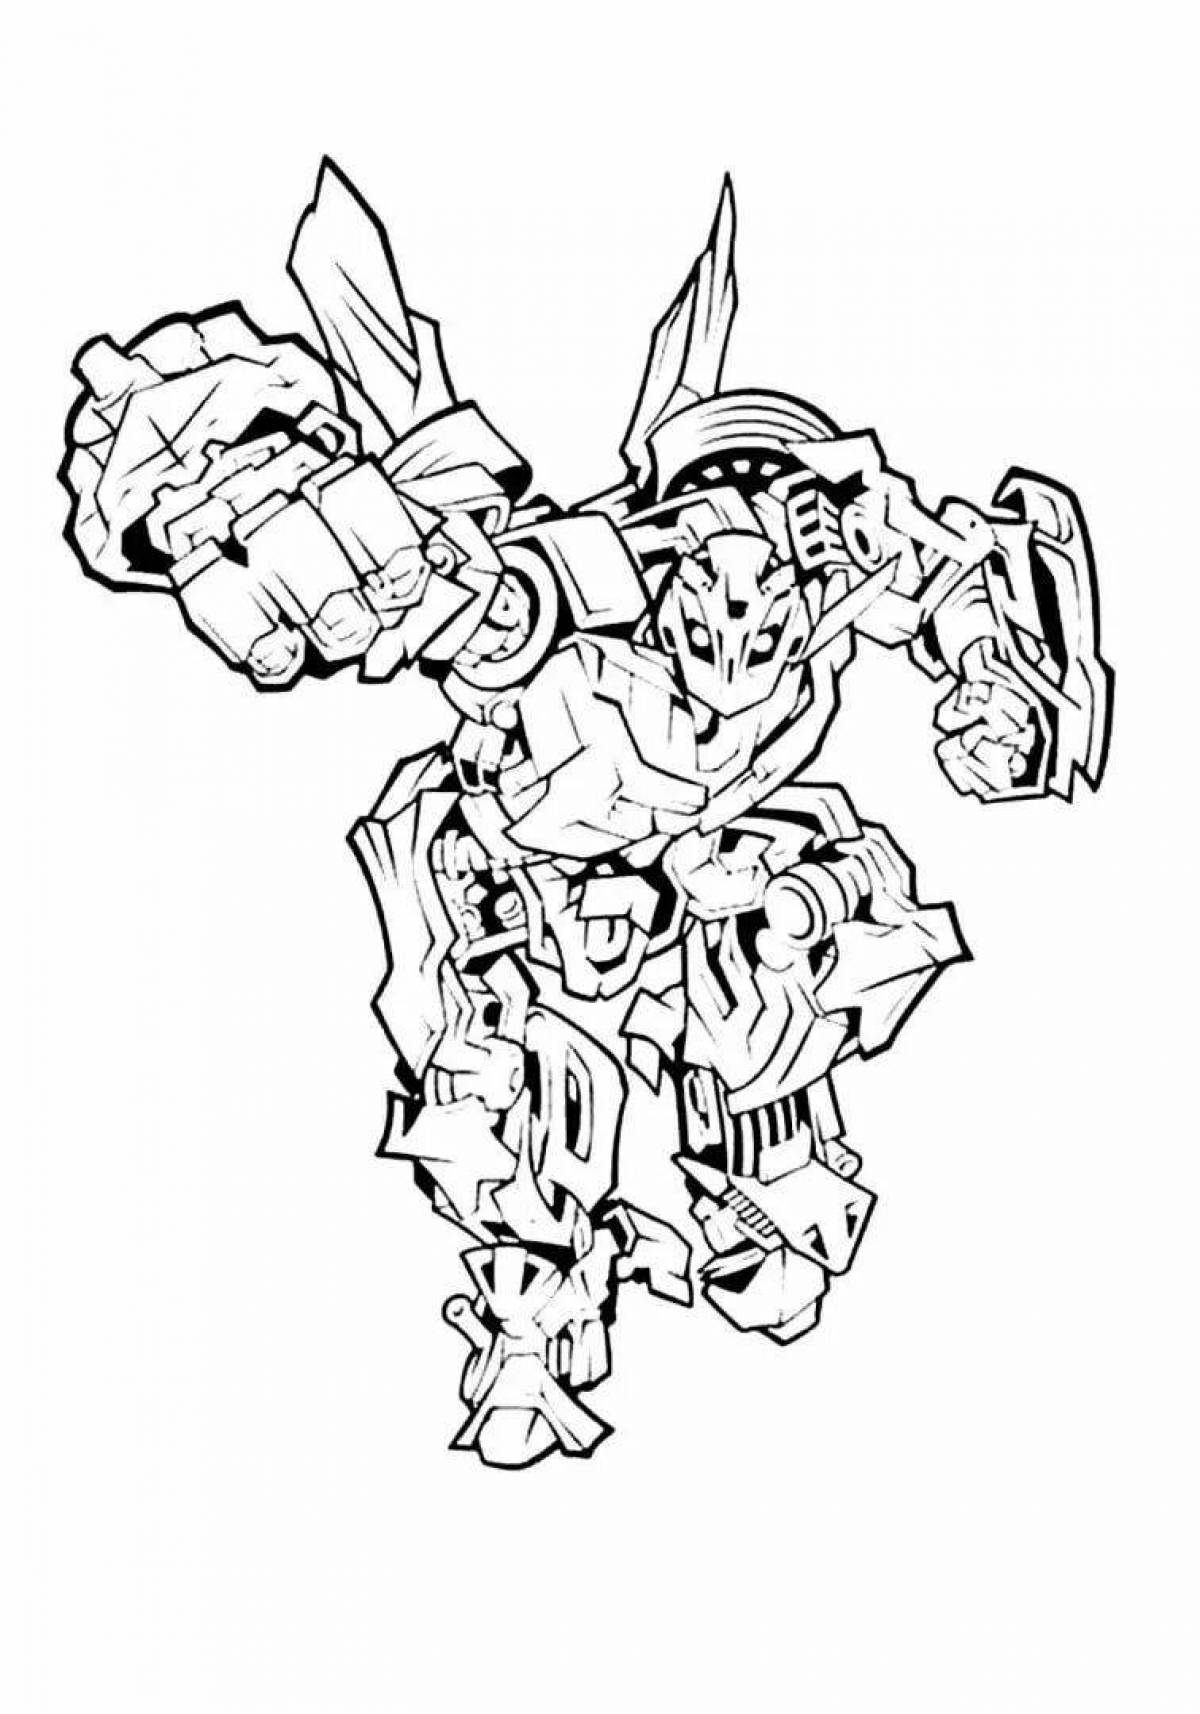 Impressive Transformers movie coloring page